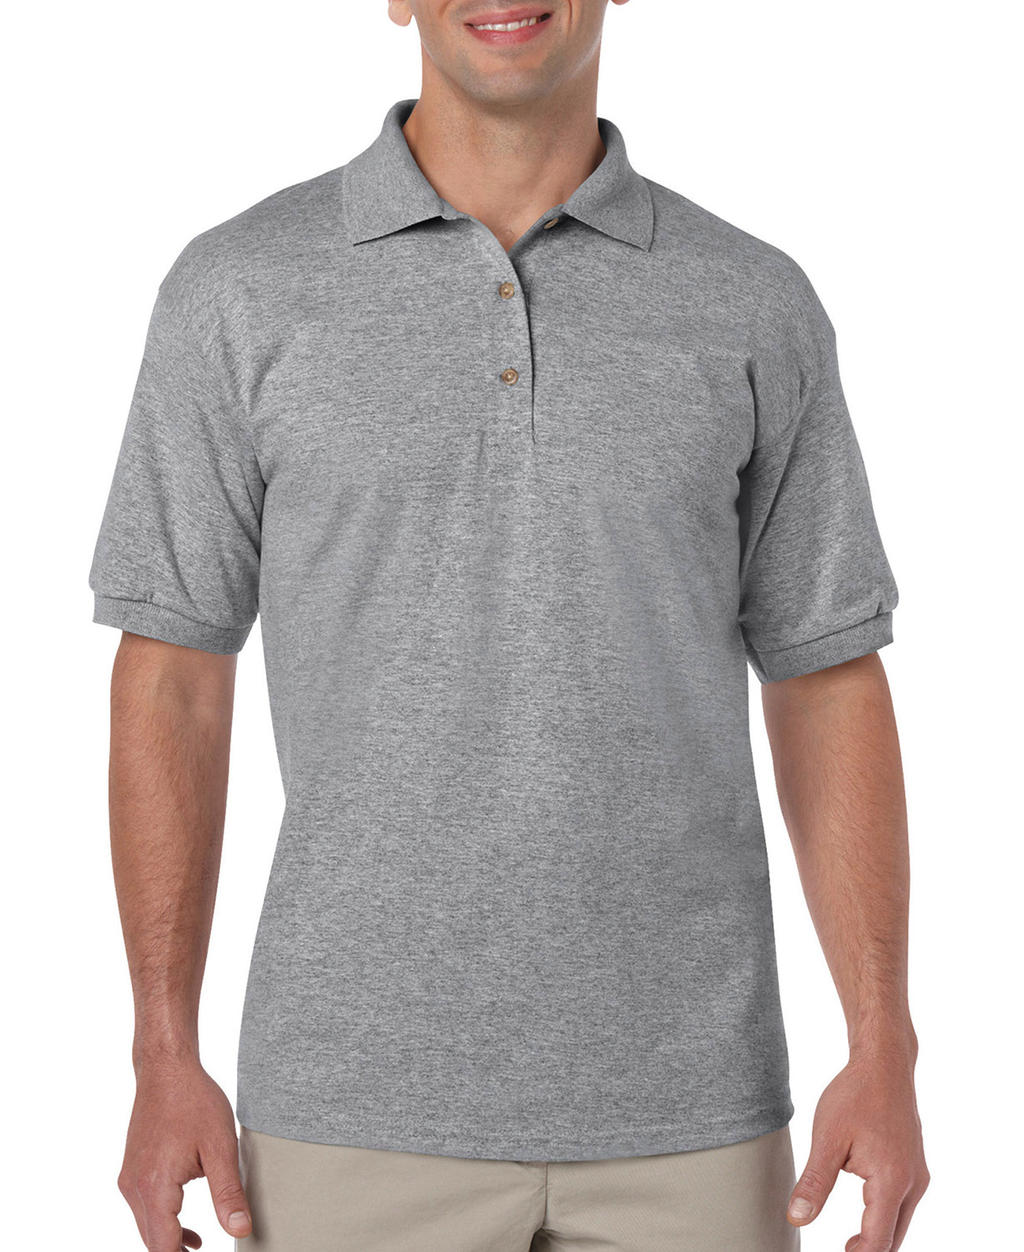  DryBlend Adult Jersey Polo in Farbe Sport Grey